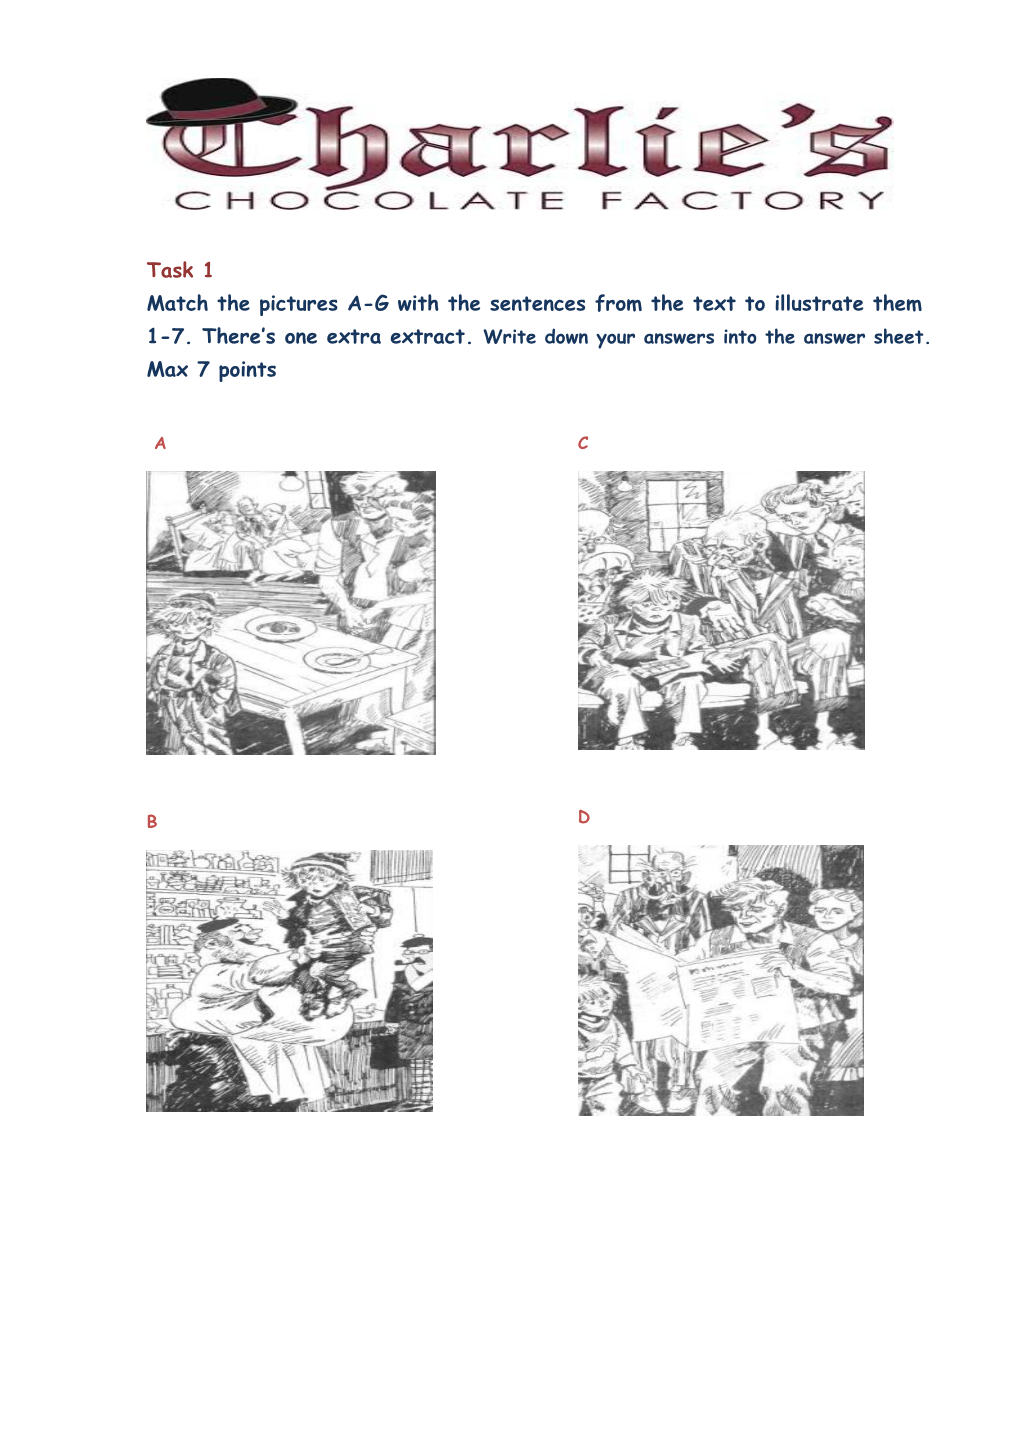 Match the Pictures A-G with the Sentences from the Text to Illustrate Them 1-7. There